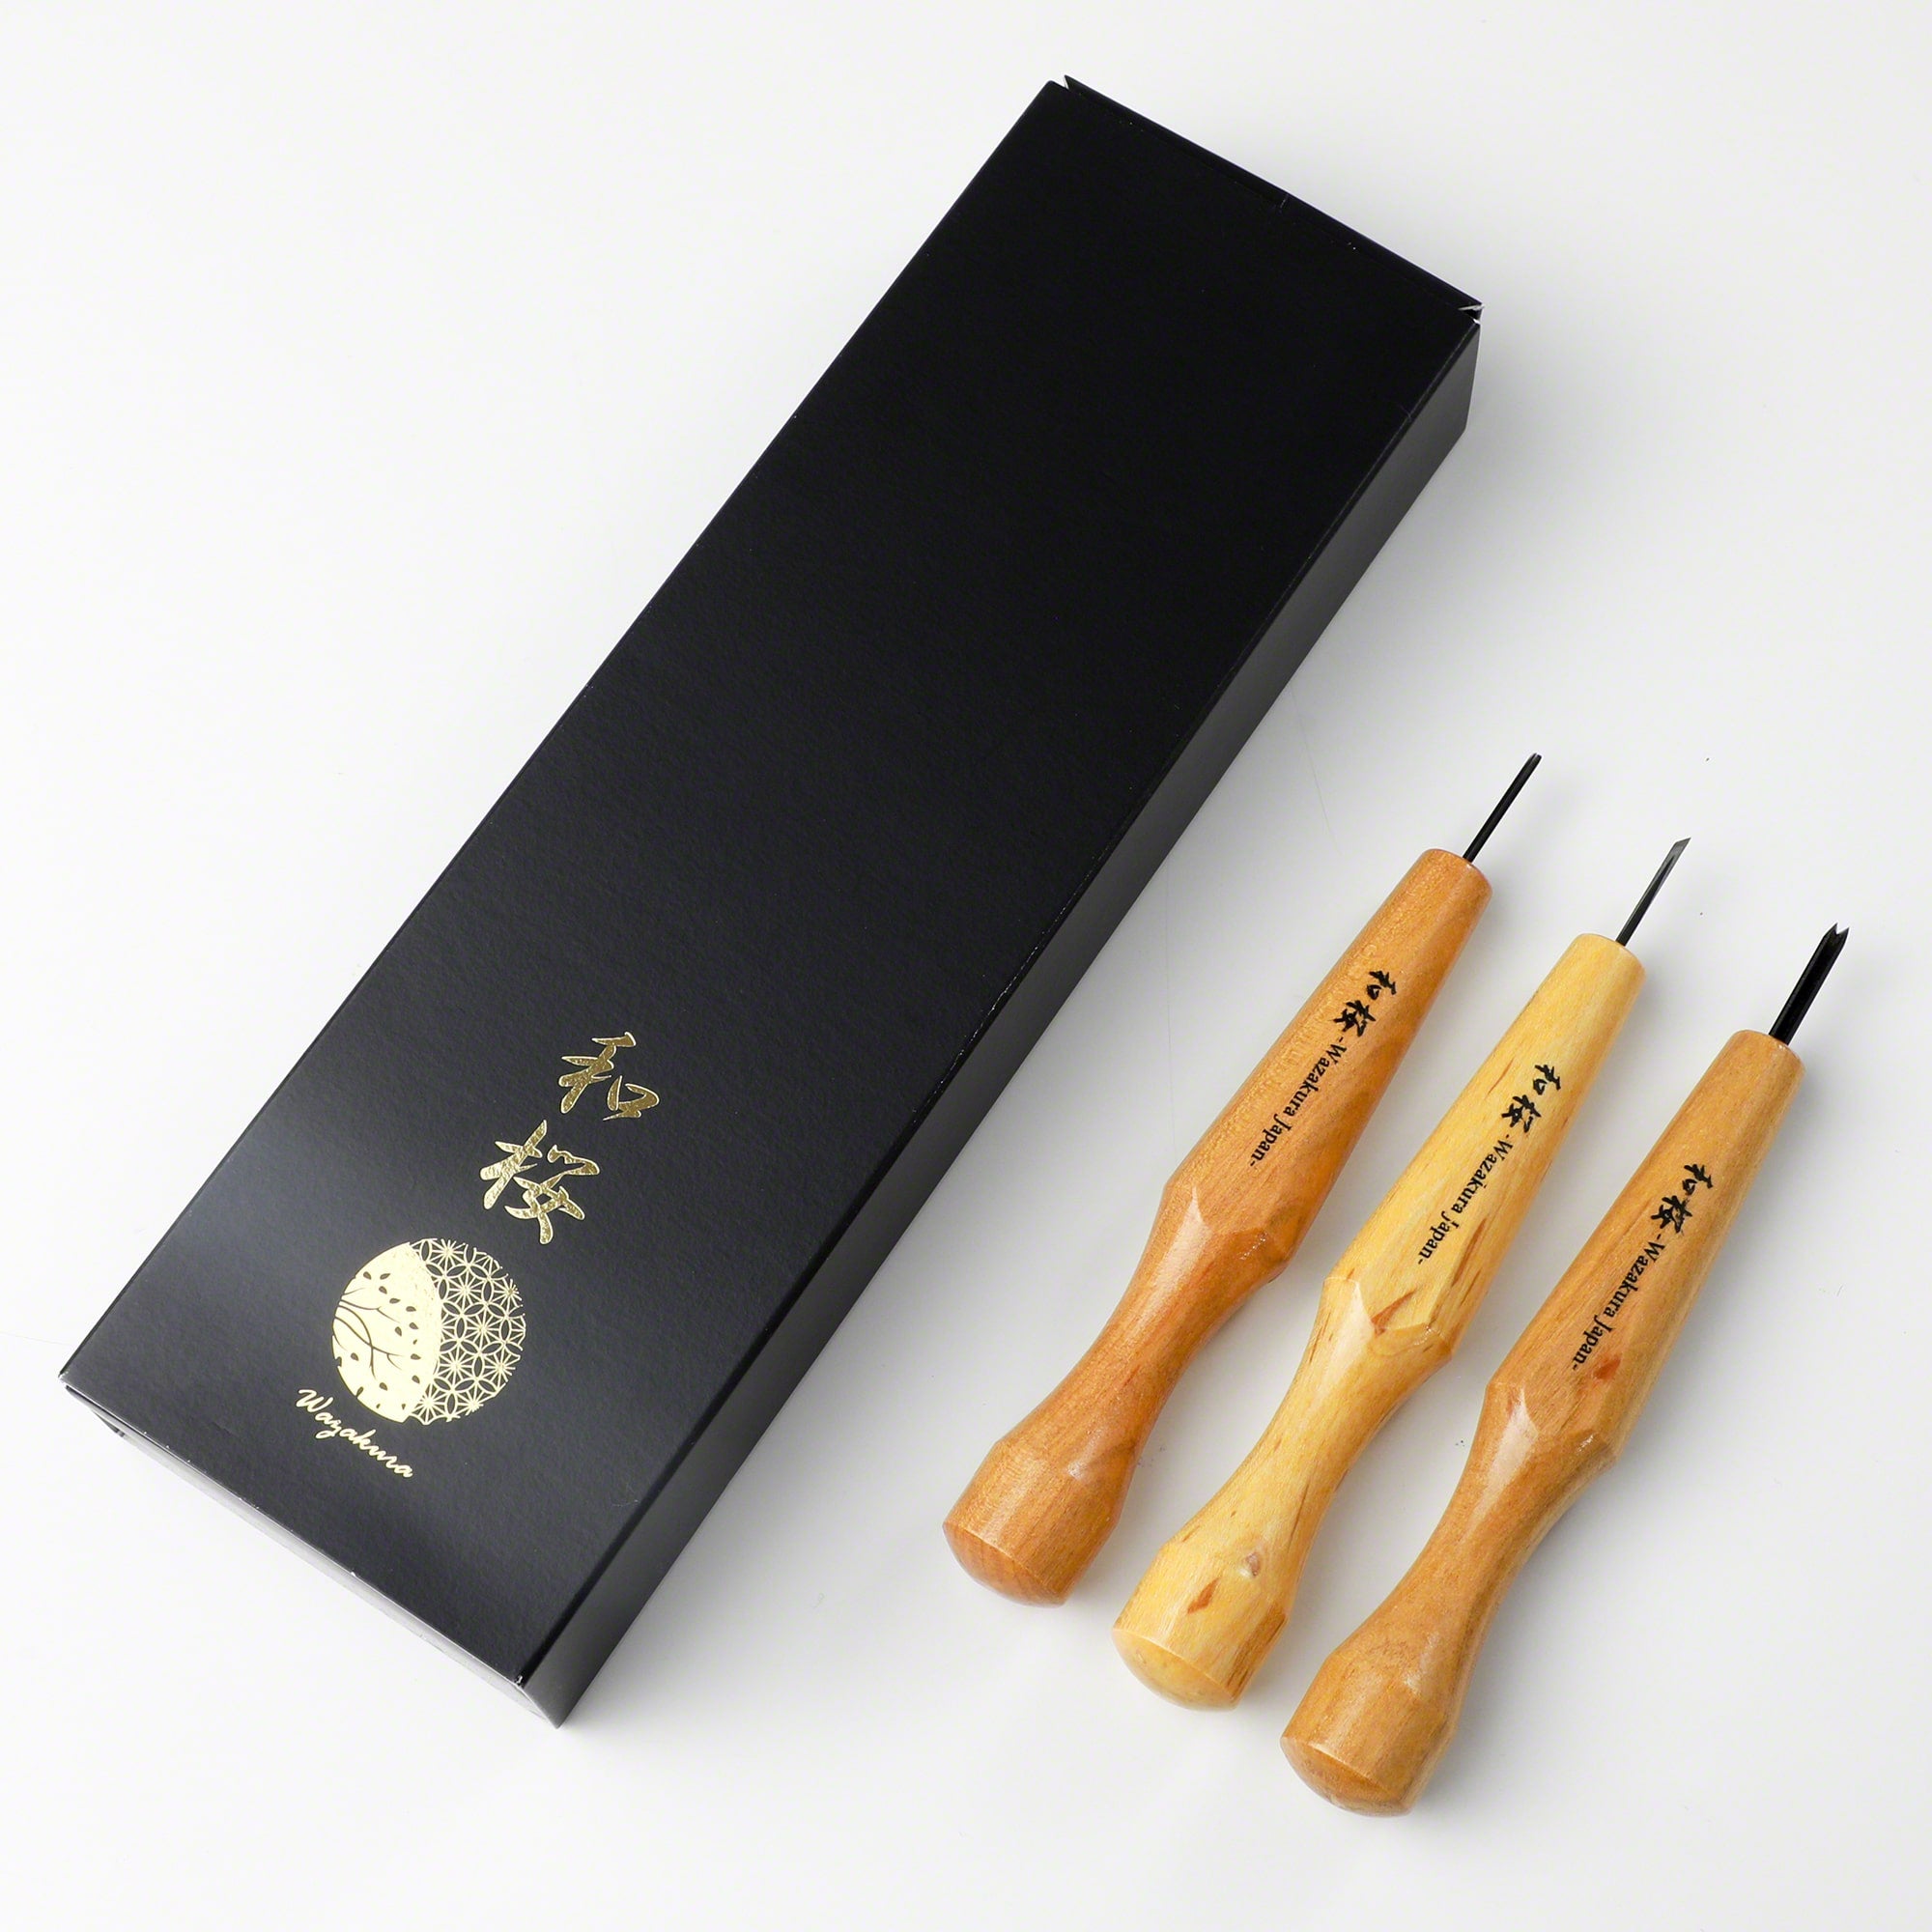 Mikisyo Power Grip Woodcarving 7-Piece Set Gouges & Chisels Wood